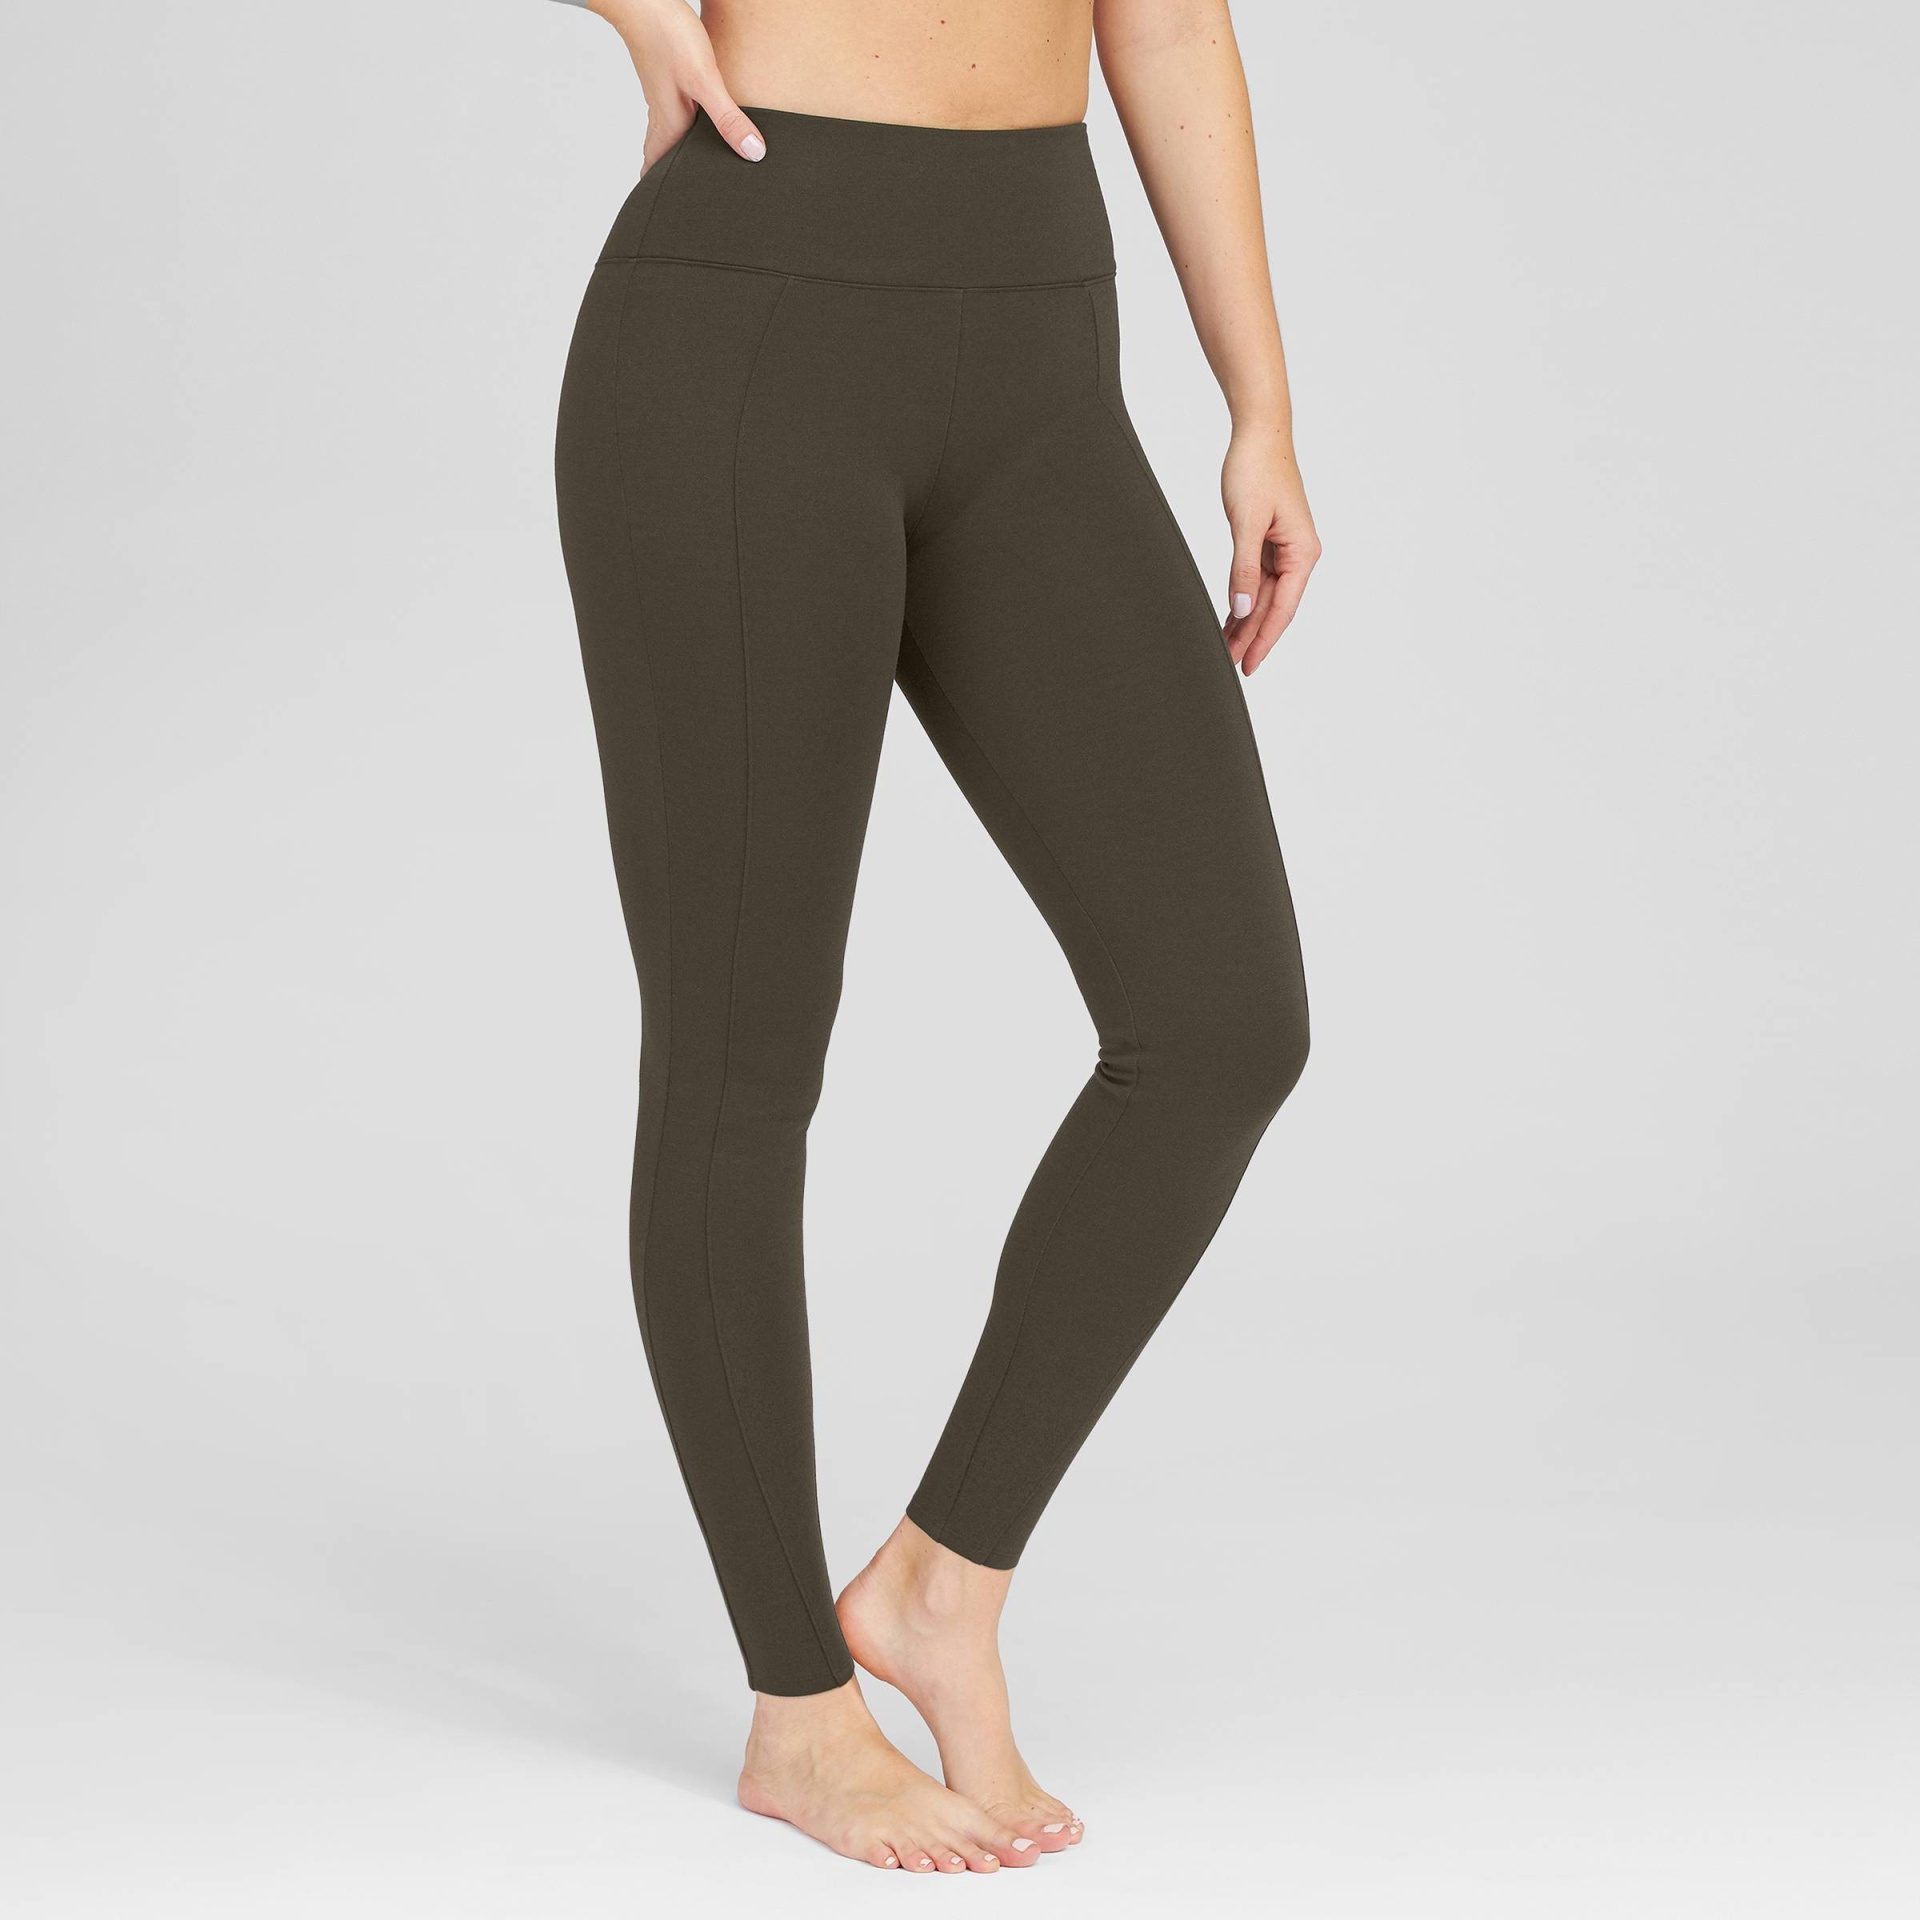 slide 1 of 4, ASSETS by SPANX Women's Ponte Shaping Leggings - Olive Green XL, 1 ct